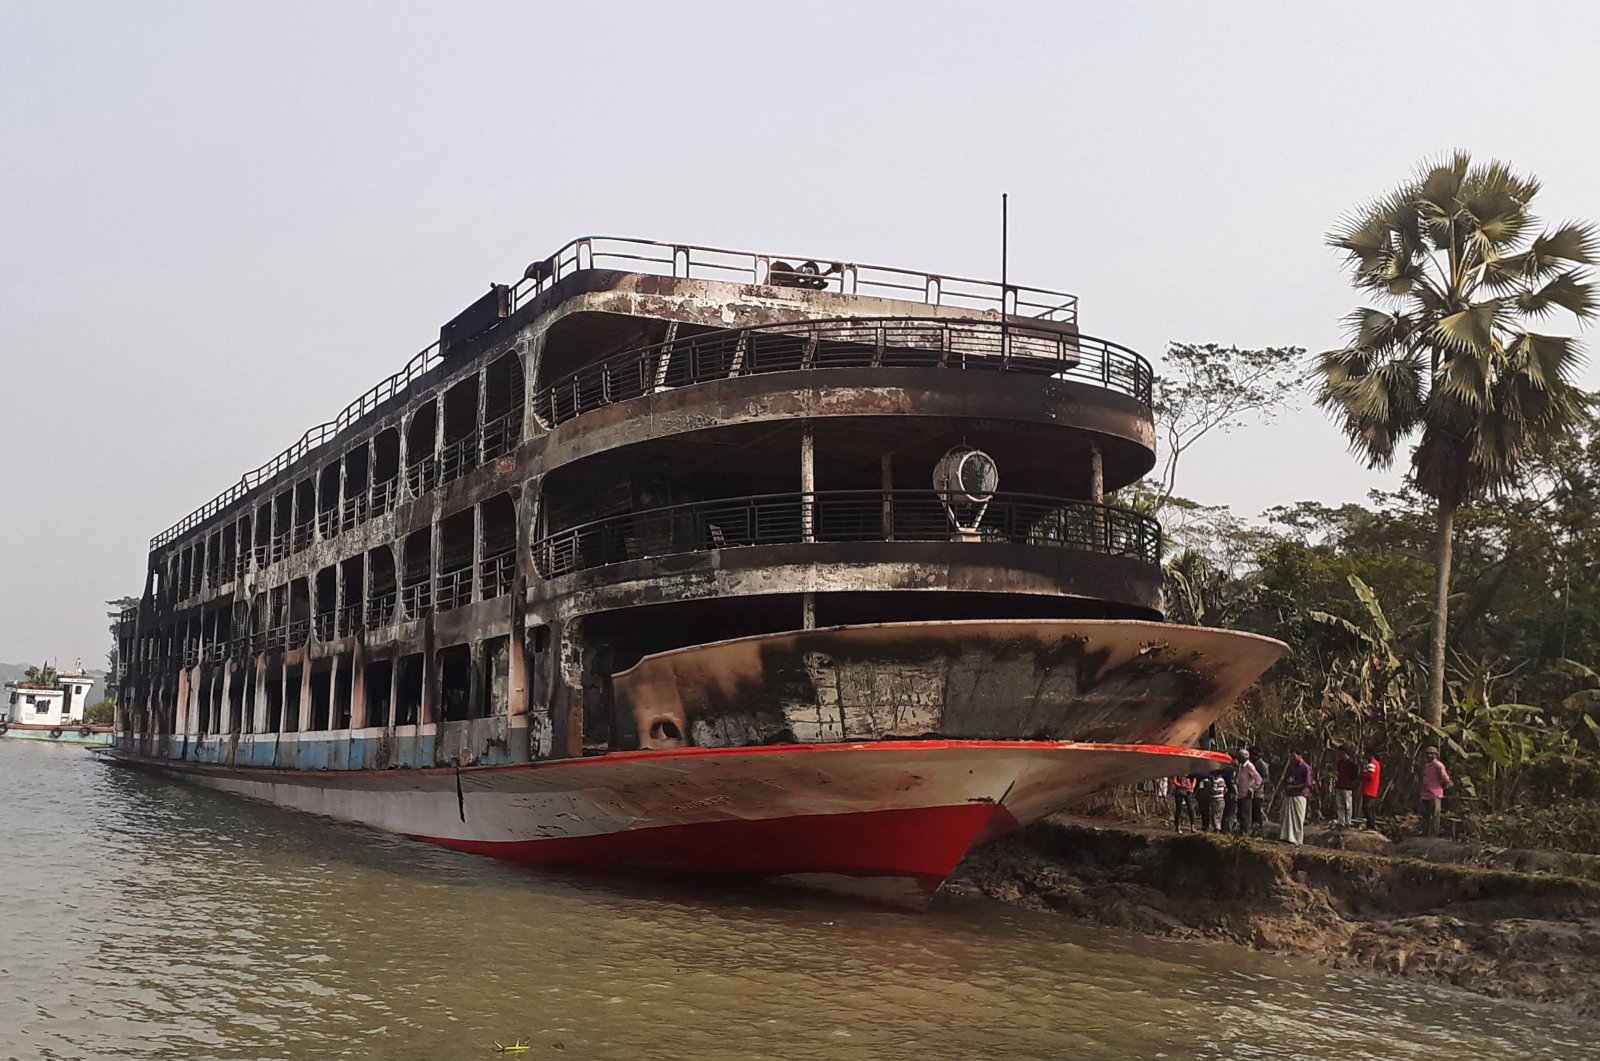 The burnt-out ferry is seen anchored along a coast a day after it caught fire, killing at least 37 people in Jhalkathi, 250 kilometers (160 miles) south of Dhaka, Dec. 24, 2021. (AFP Photo)